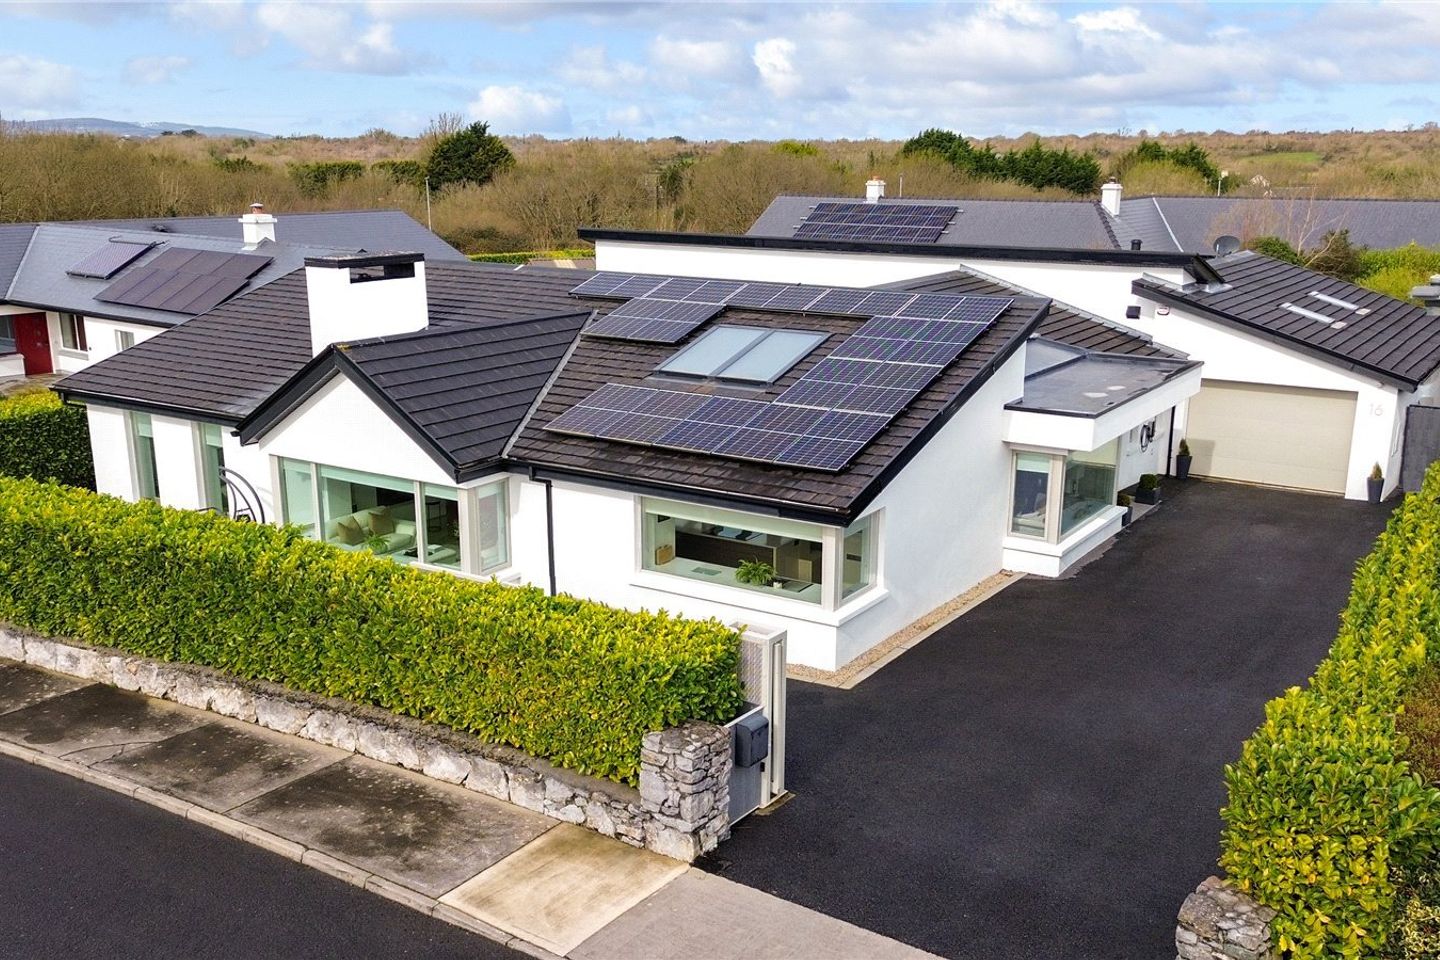 16 Carraig Ban, Coolough Road, Galway City, Co. Galway, H91XDX9